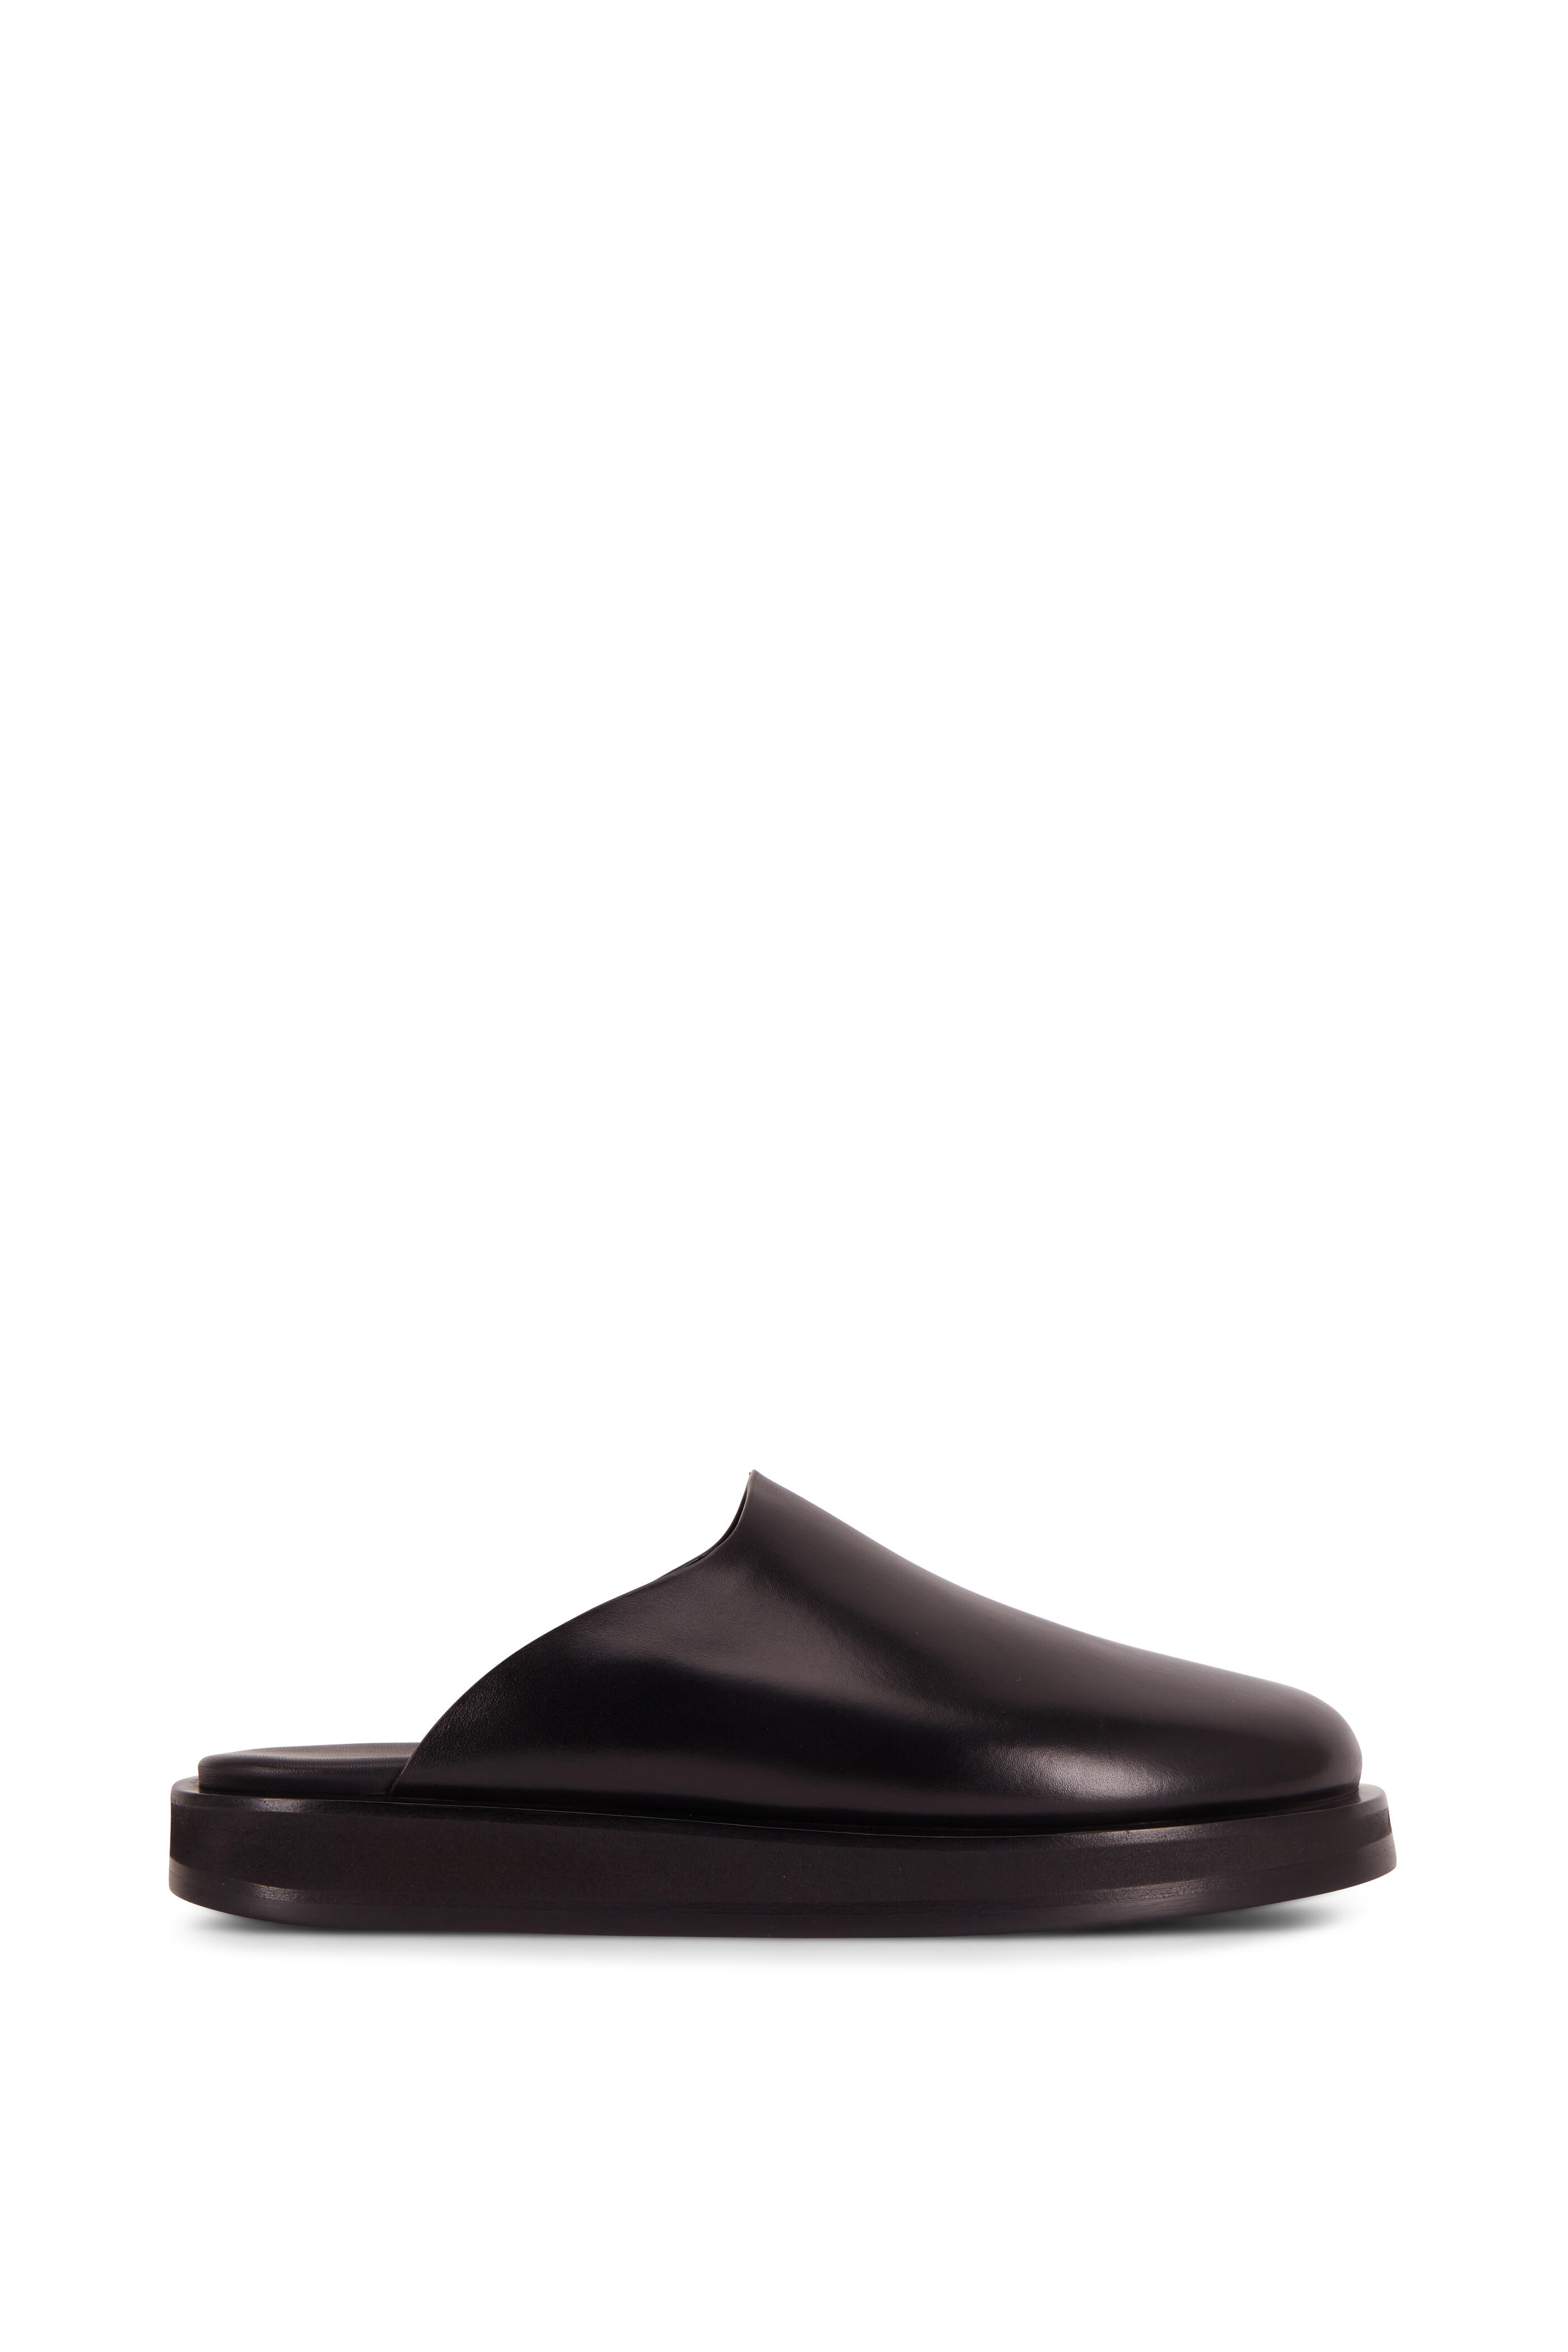 The Row - Sabot Black Leather Flat Mule | Mitchell Stores